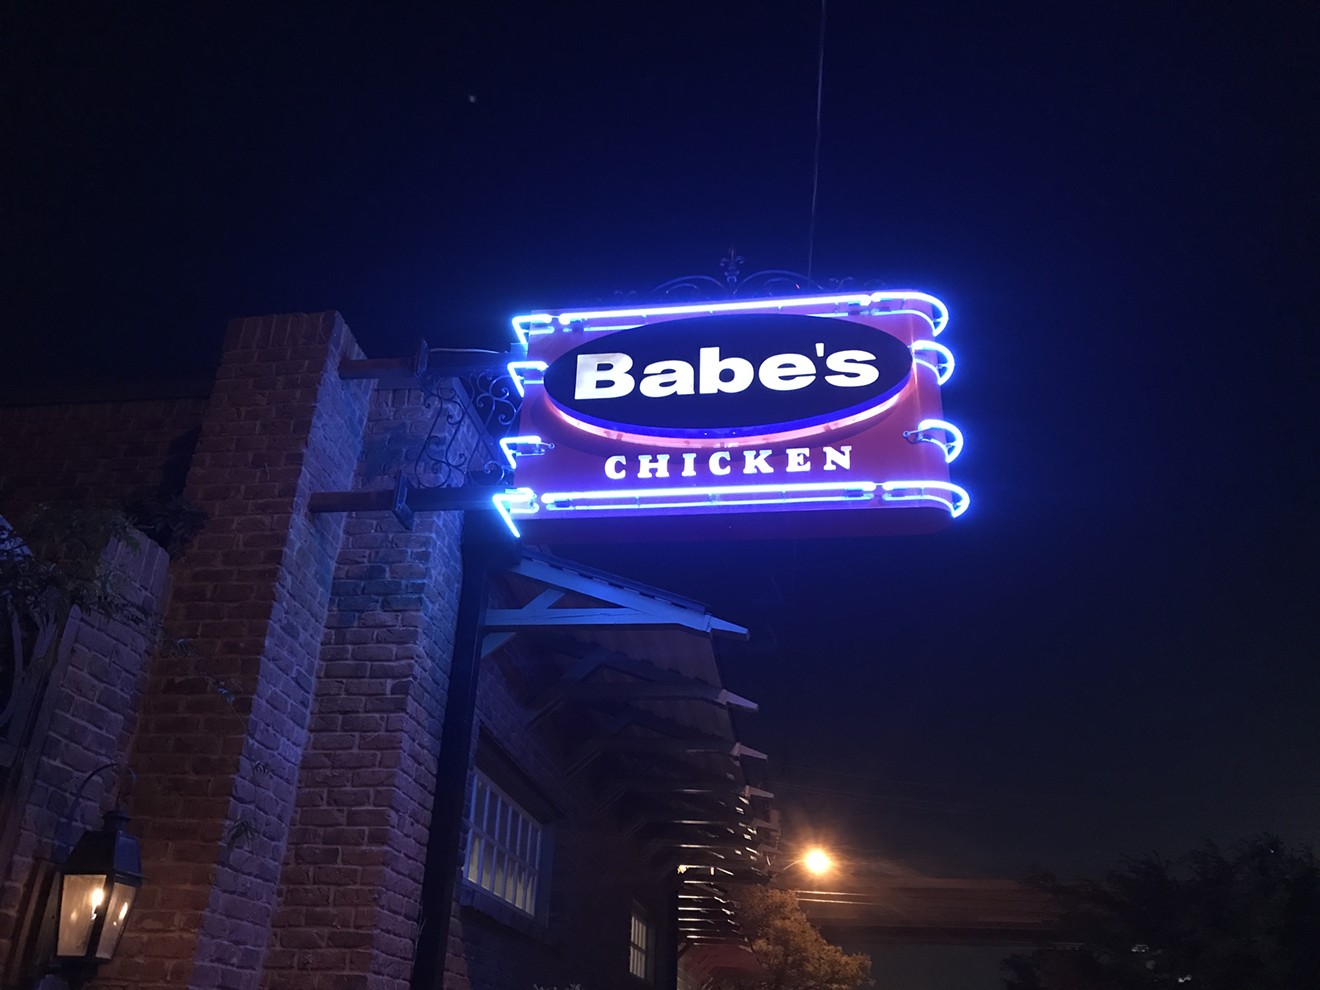 Babe's is one of the city's favorite fried chicken spots, but it comes with a twist: 'The Hokey Pokey.'